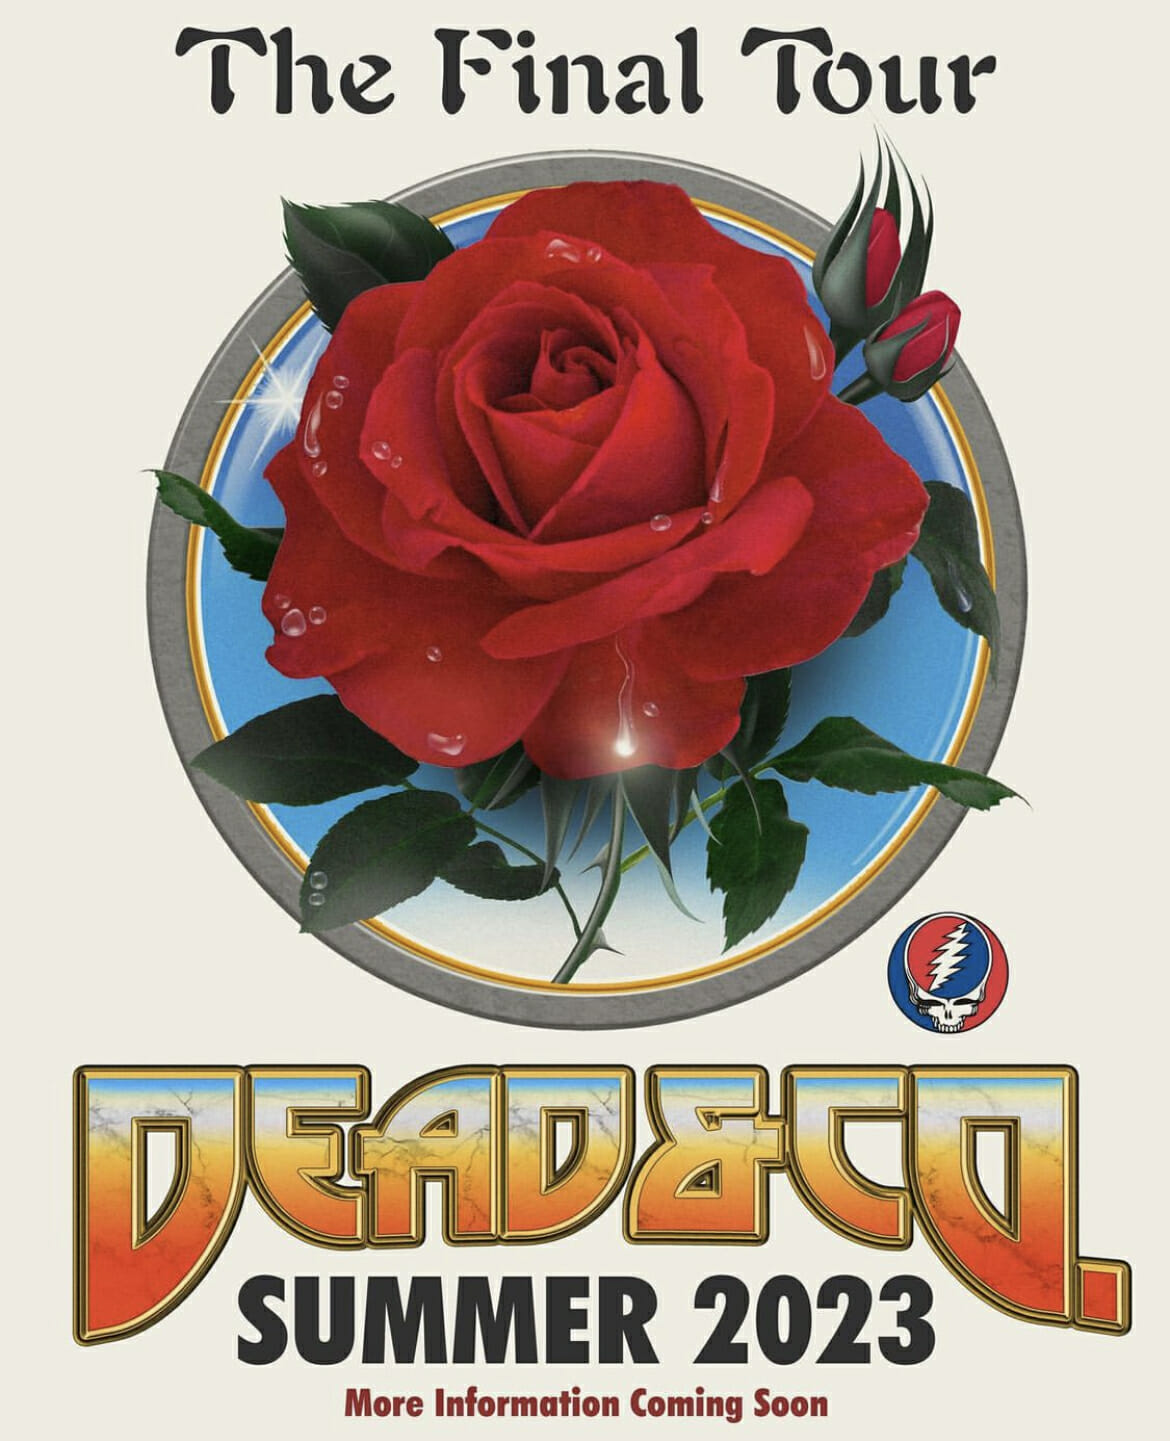 Dead & Company Announce Final Tour Slated for Summer 2023